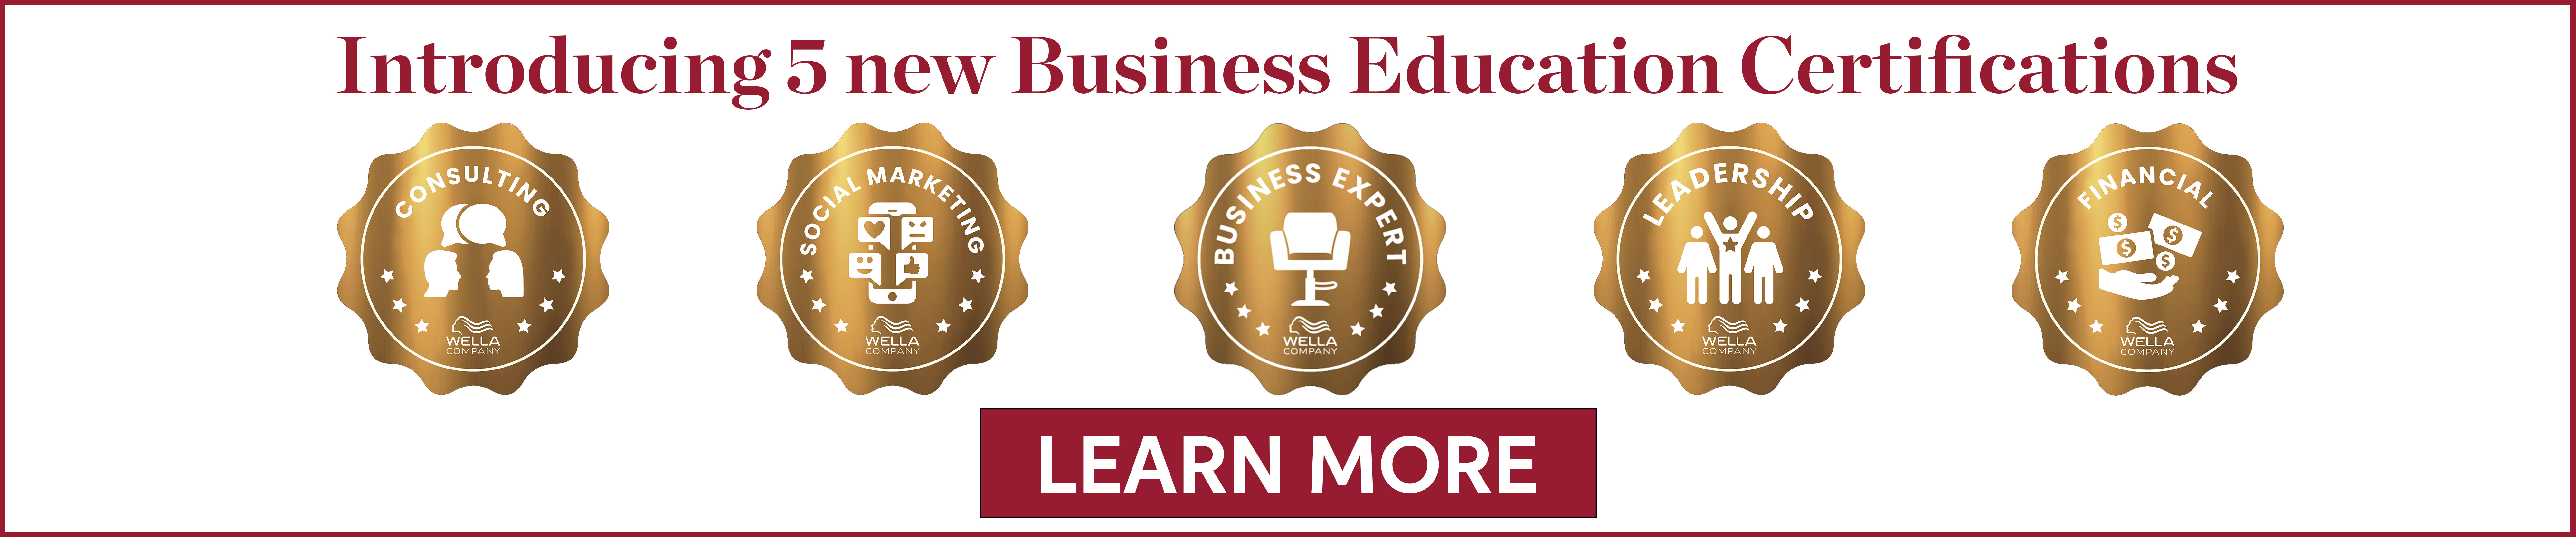 BUSINESS CERTIFICATIONS 